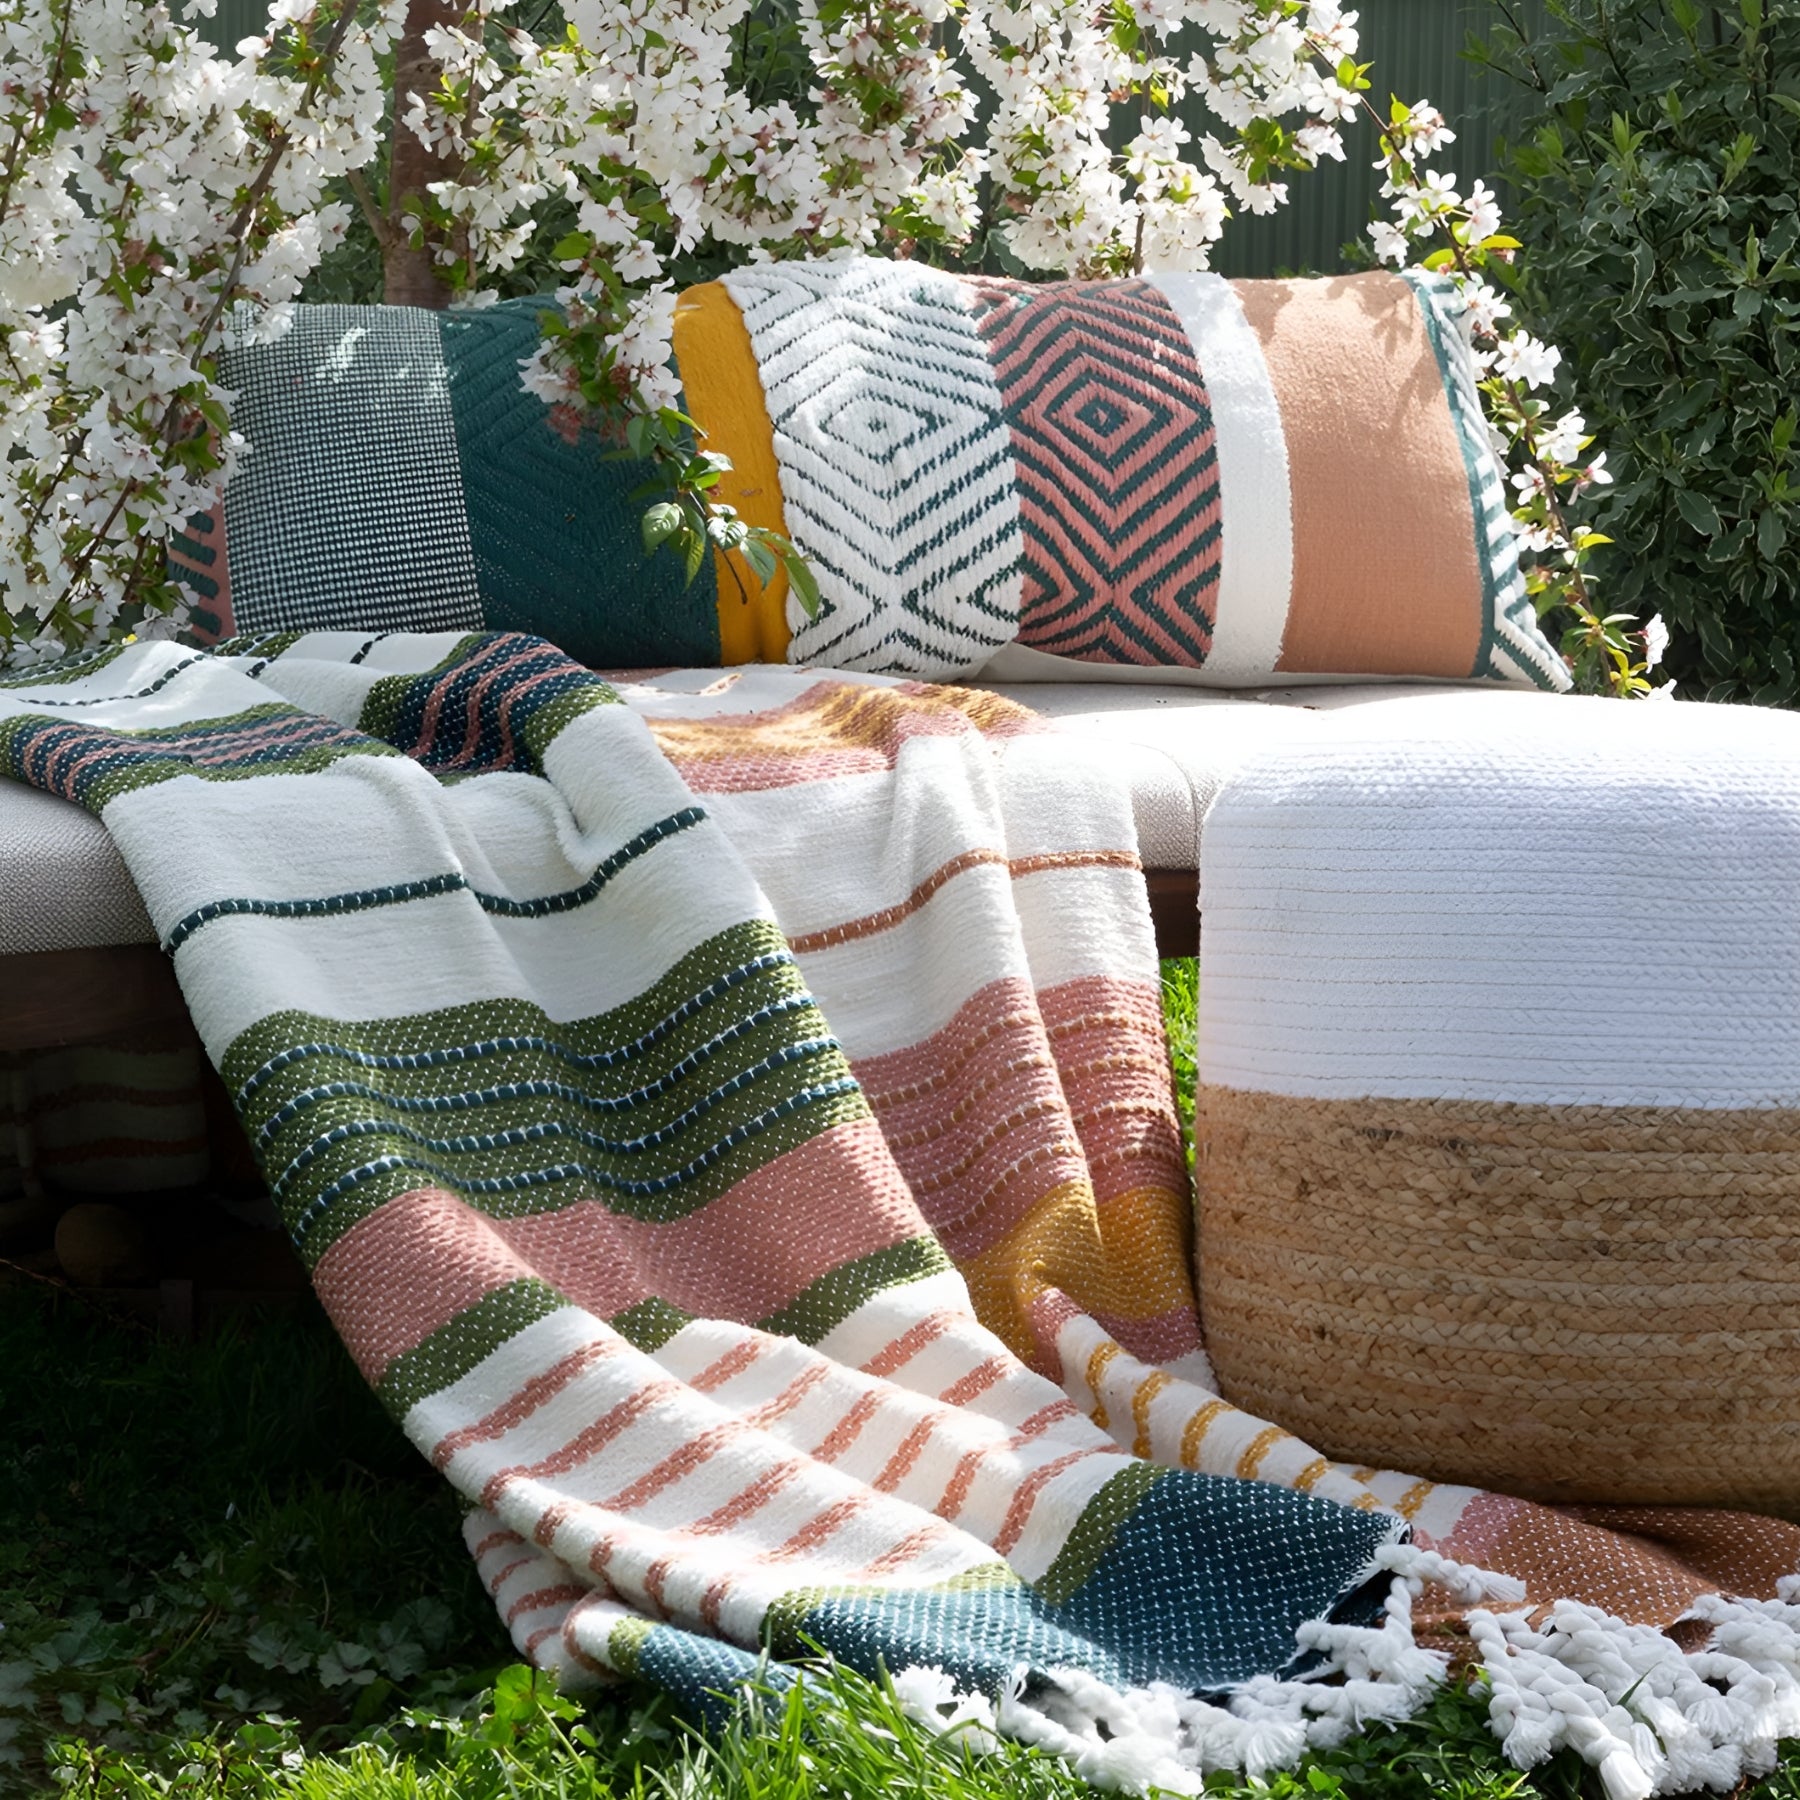 Zephyr Throw Blanket in outdoor setting, showcasing Peach Hues and versatile use.